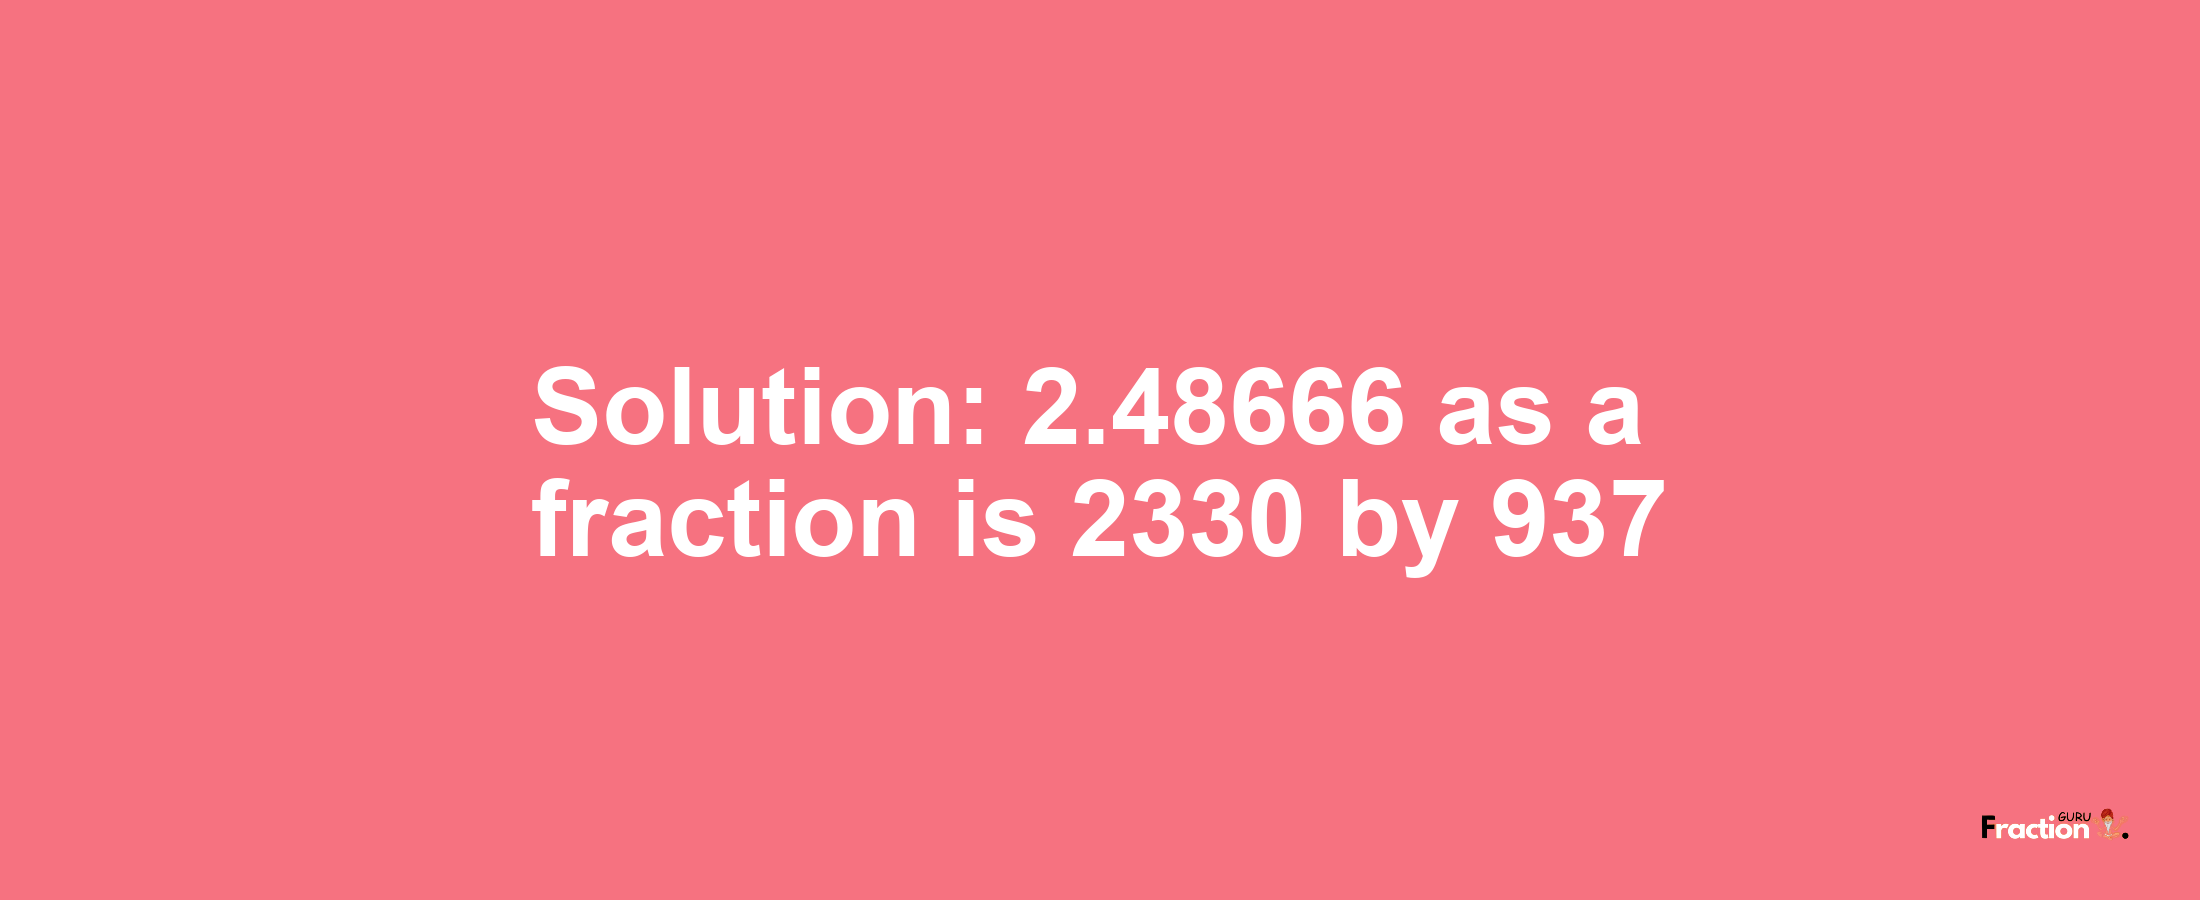 Solution:2.48666 as a fraction is 2330/937